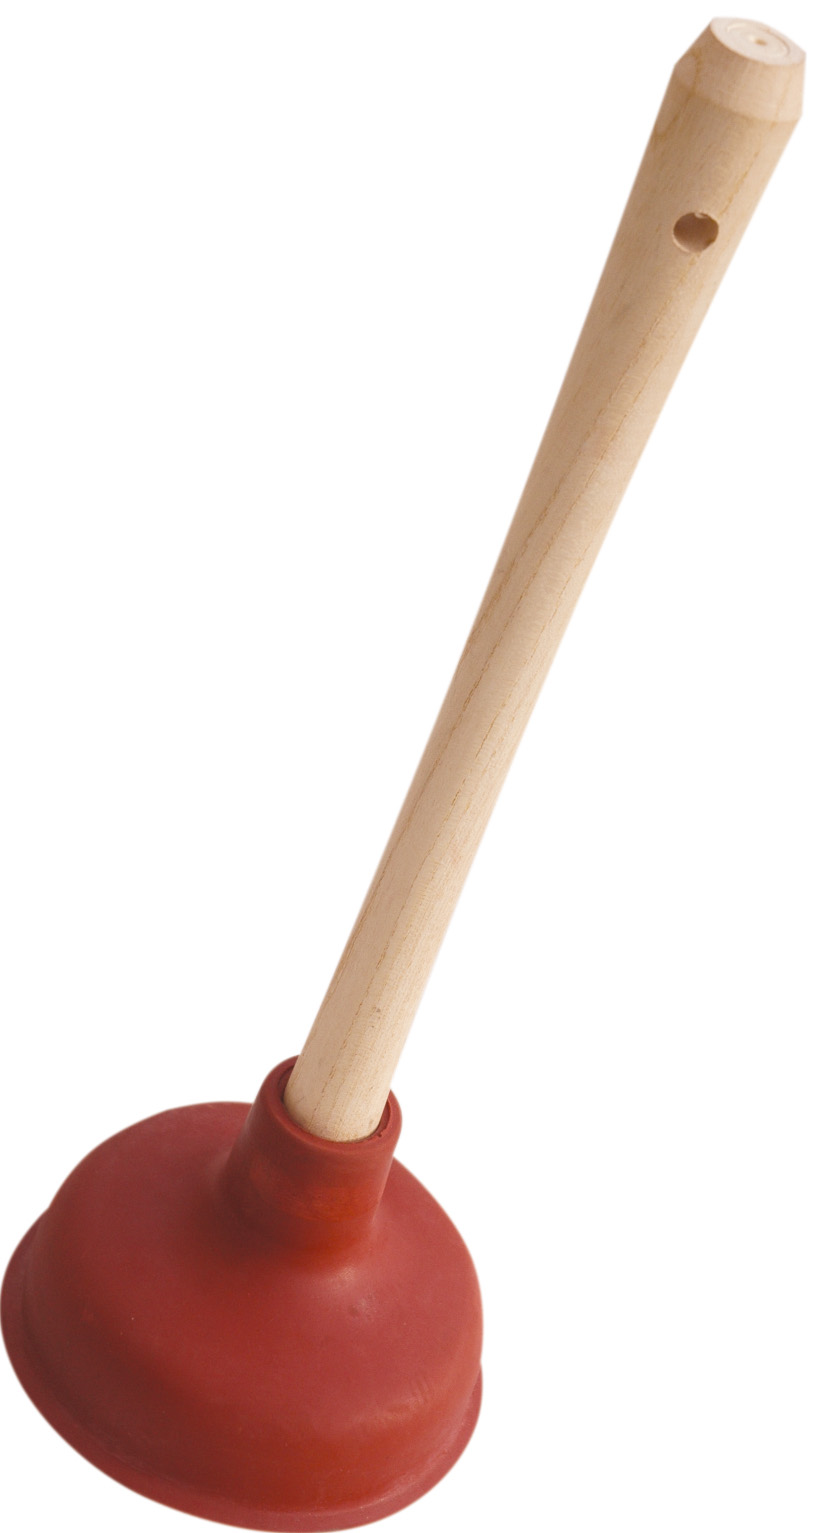 02325 - plunger with wooden handle, 32 cm